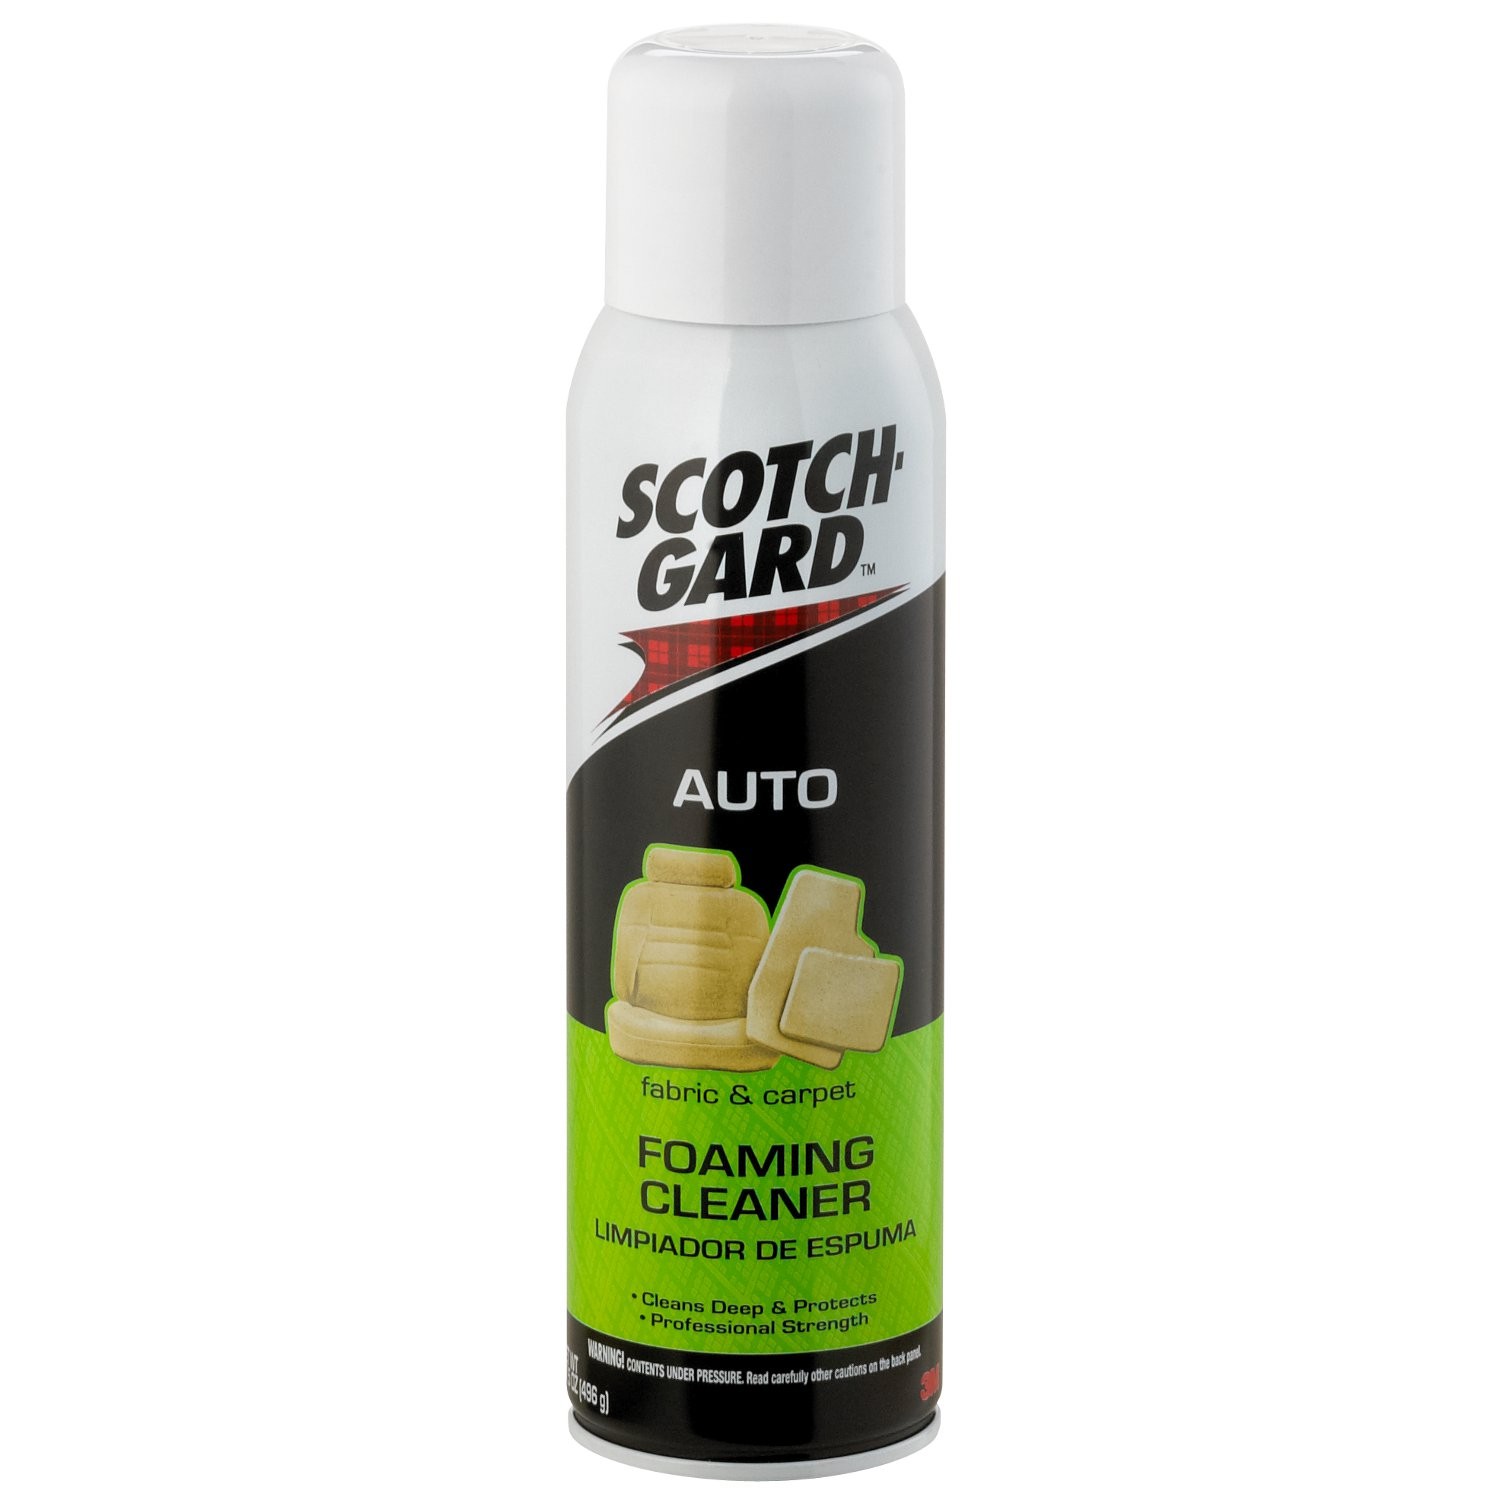 UPC 021200471551 product image for Scotchgard Auto Fabric and Carpet Foaming Cleaner | upcitemdb.com